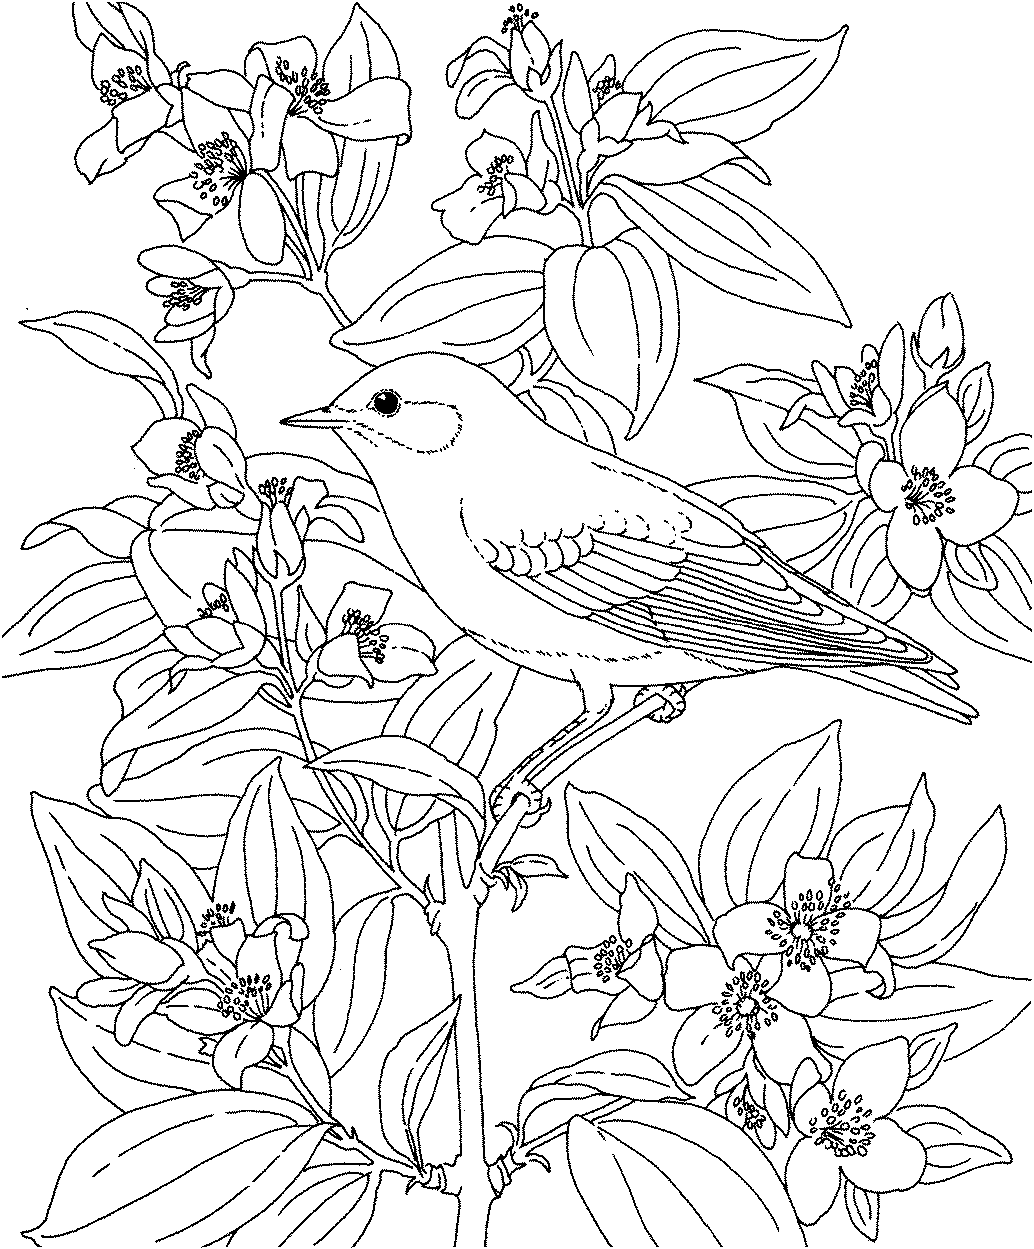 Free Birds And Flowers Coloring Pages Download Free Birds And Flowers Coloring Pages Png Images Free Cliparts On Clipart Library